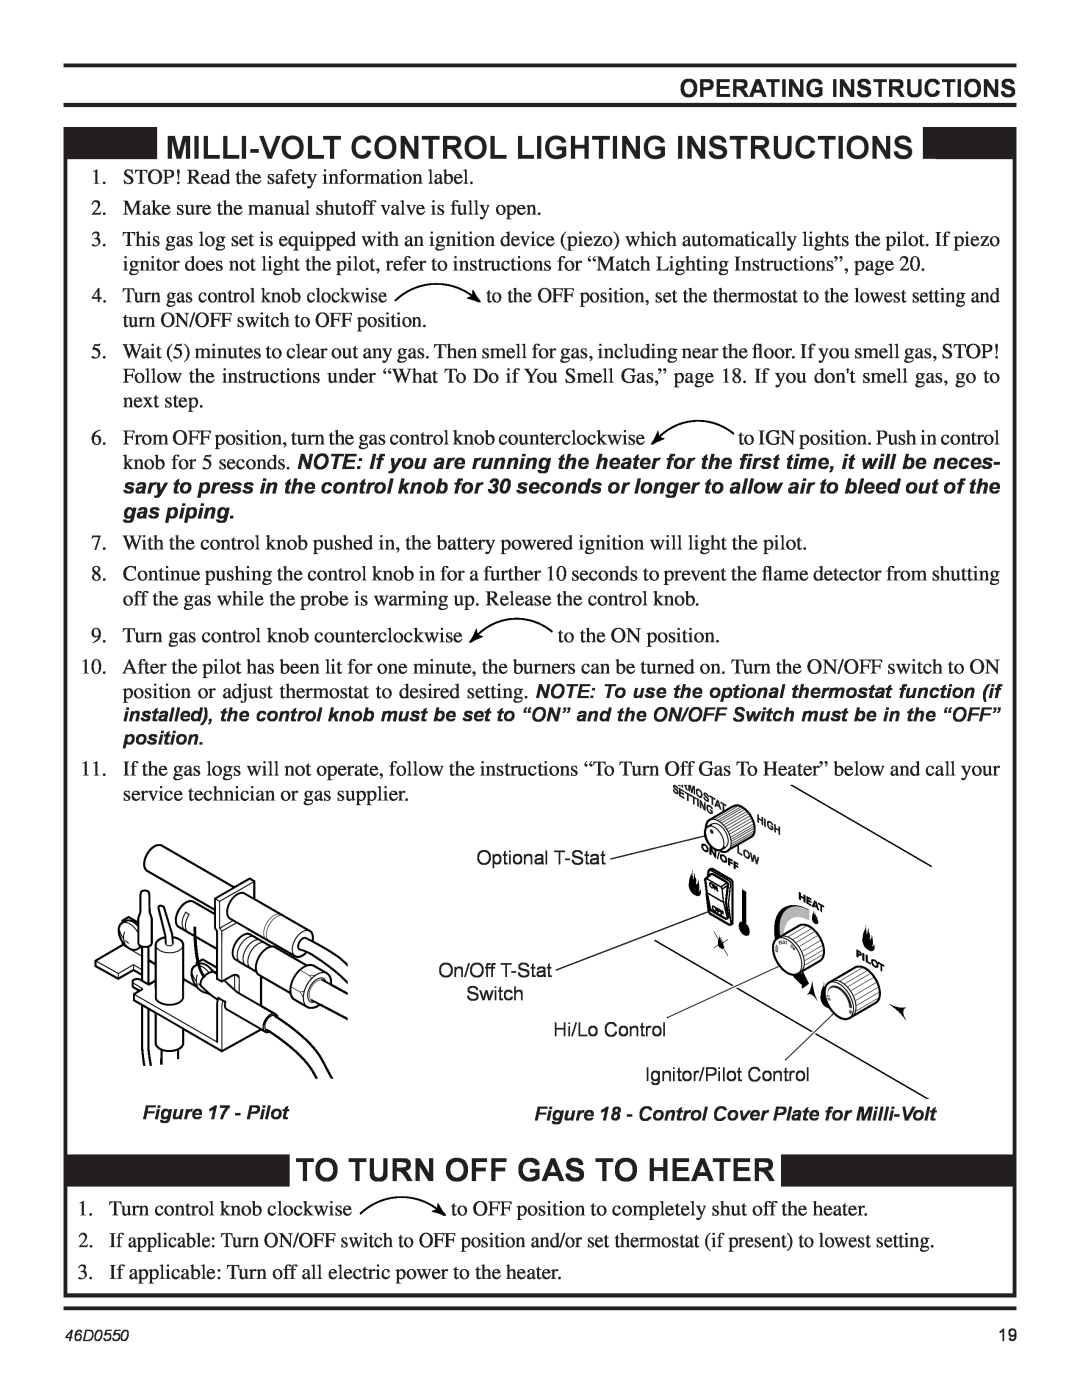 Monessen Hearth DSSPVMB Milli-Voltcontrol Lighting Instructions, To Turn Off Gas To Heater, Operating Instructions 